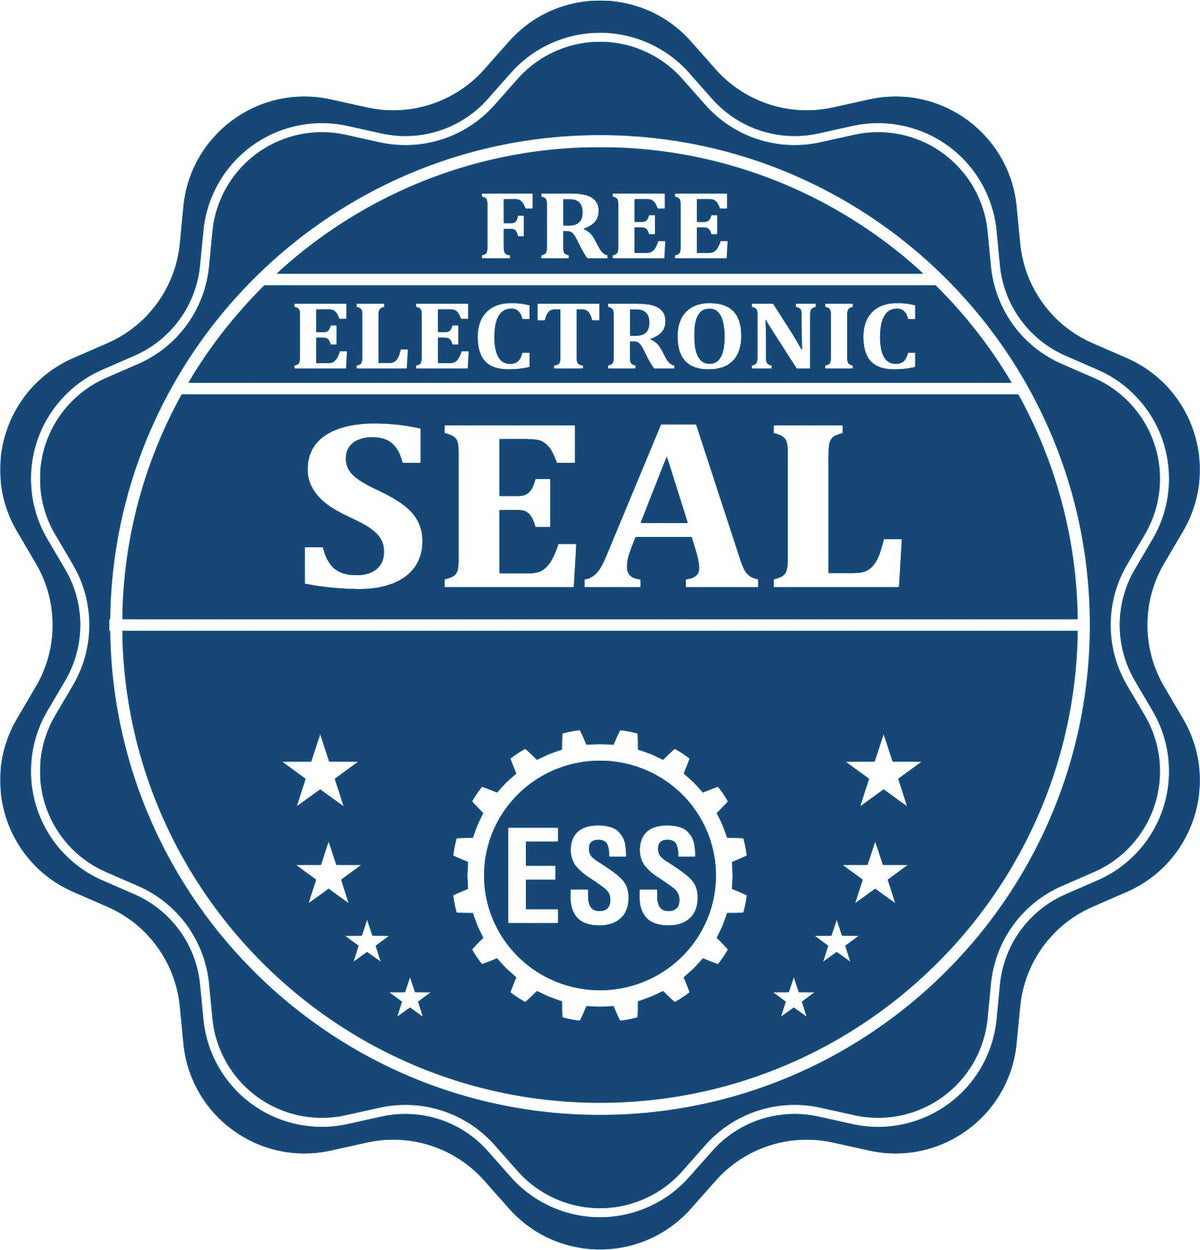 A badge showing a free electronic seal for the Hybrid Washington Land Surveyor Seal with stars and the ESS gear on the emblem.